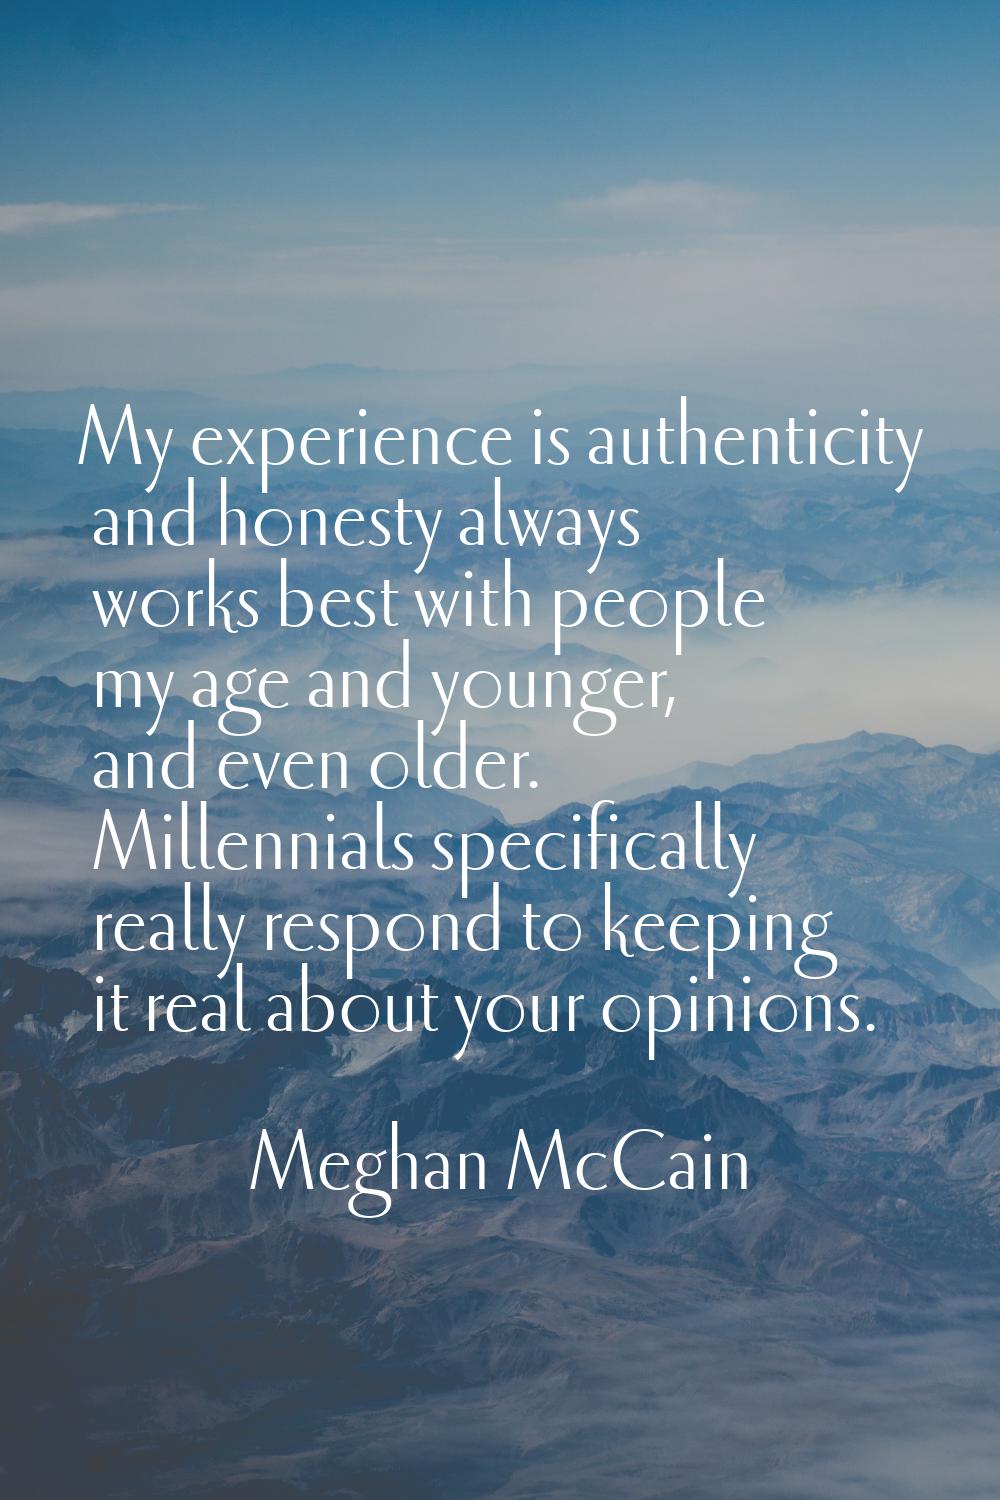 My experience is authenticity and honesty always works best with people my age and younger, and eve